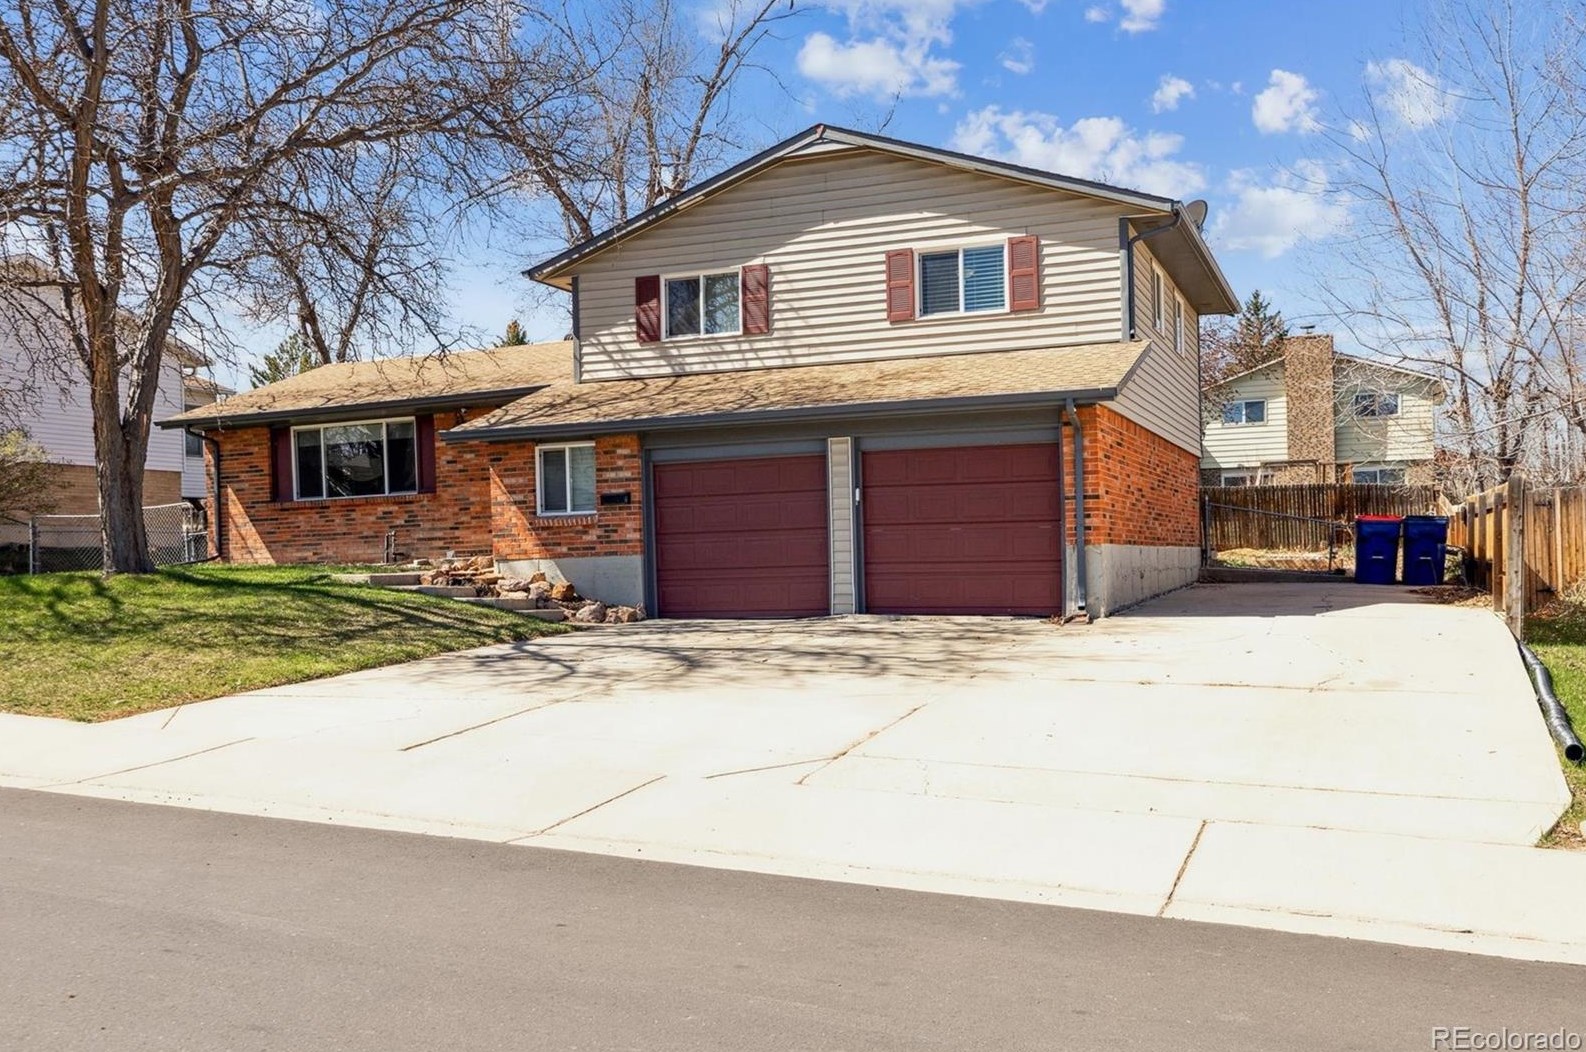 9325 Meade St, Westminster, CO 80031-6462